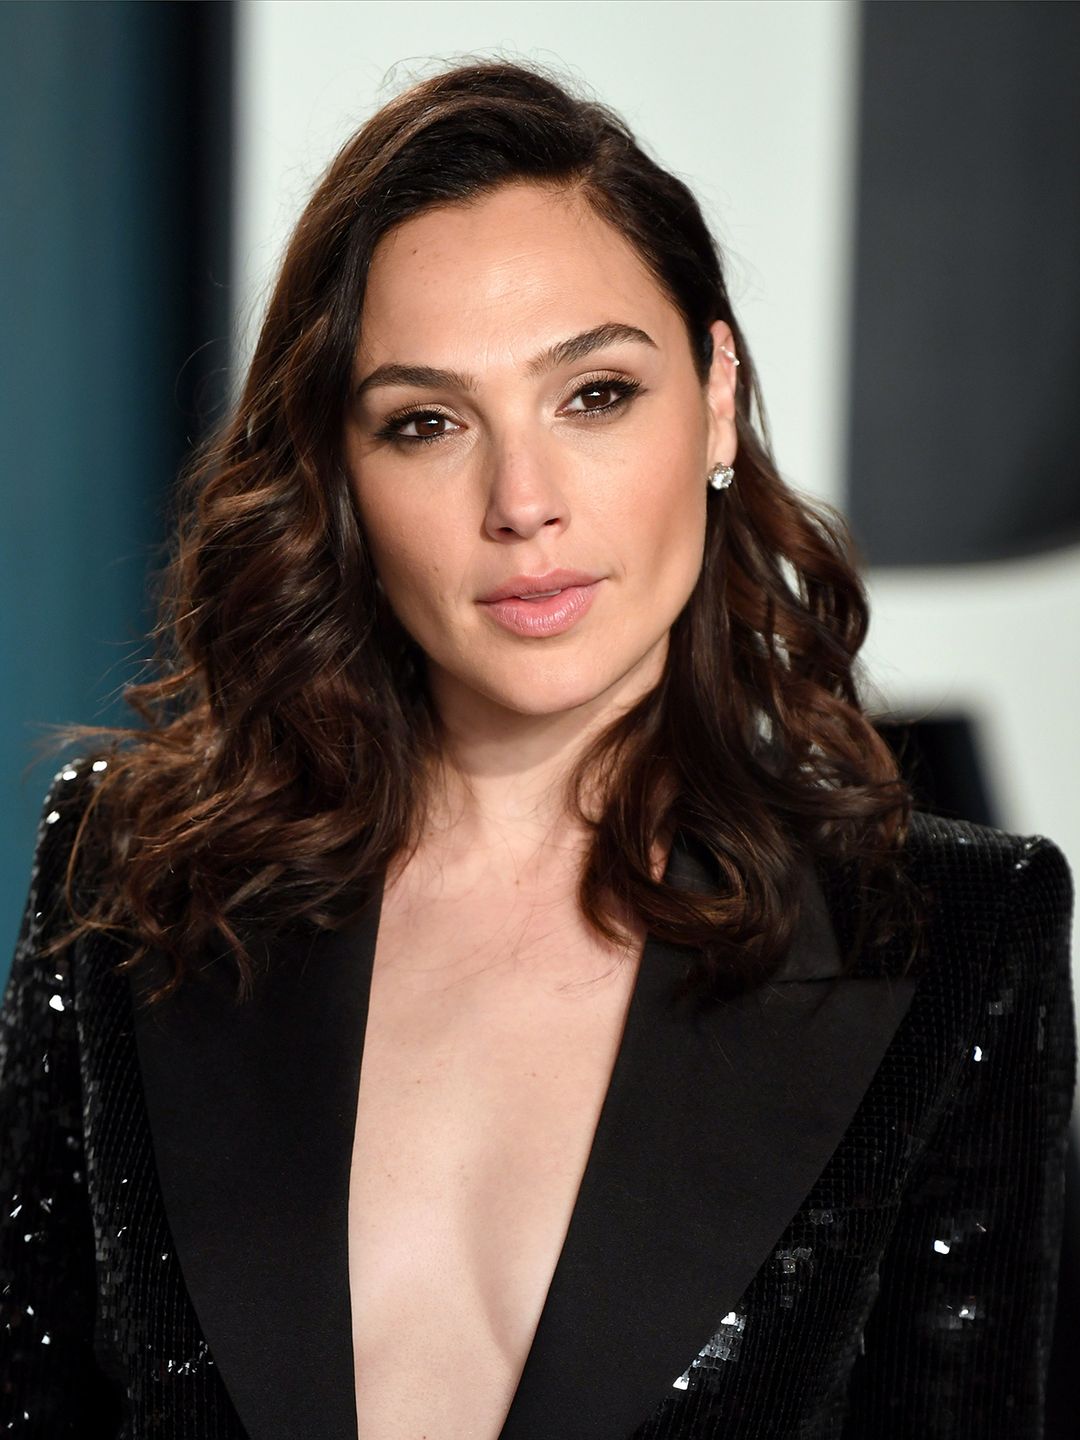 Gal Gadot how did she became famous